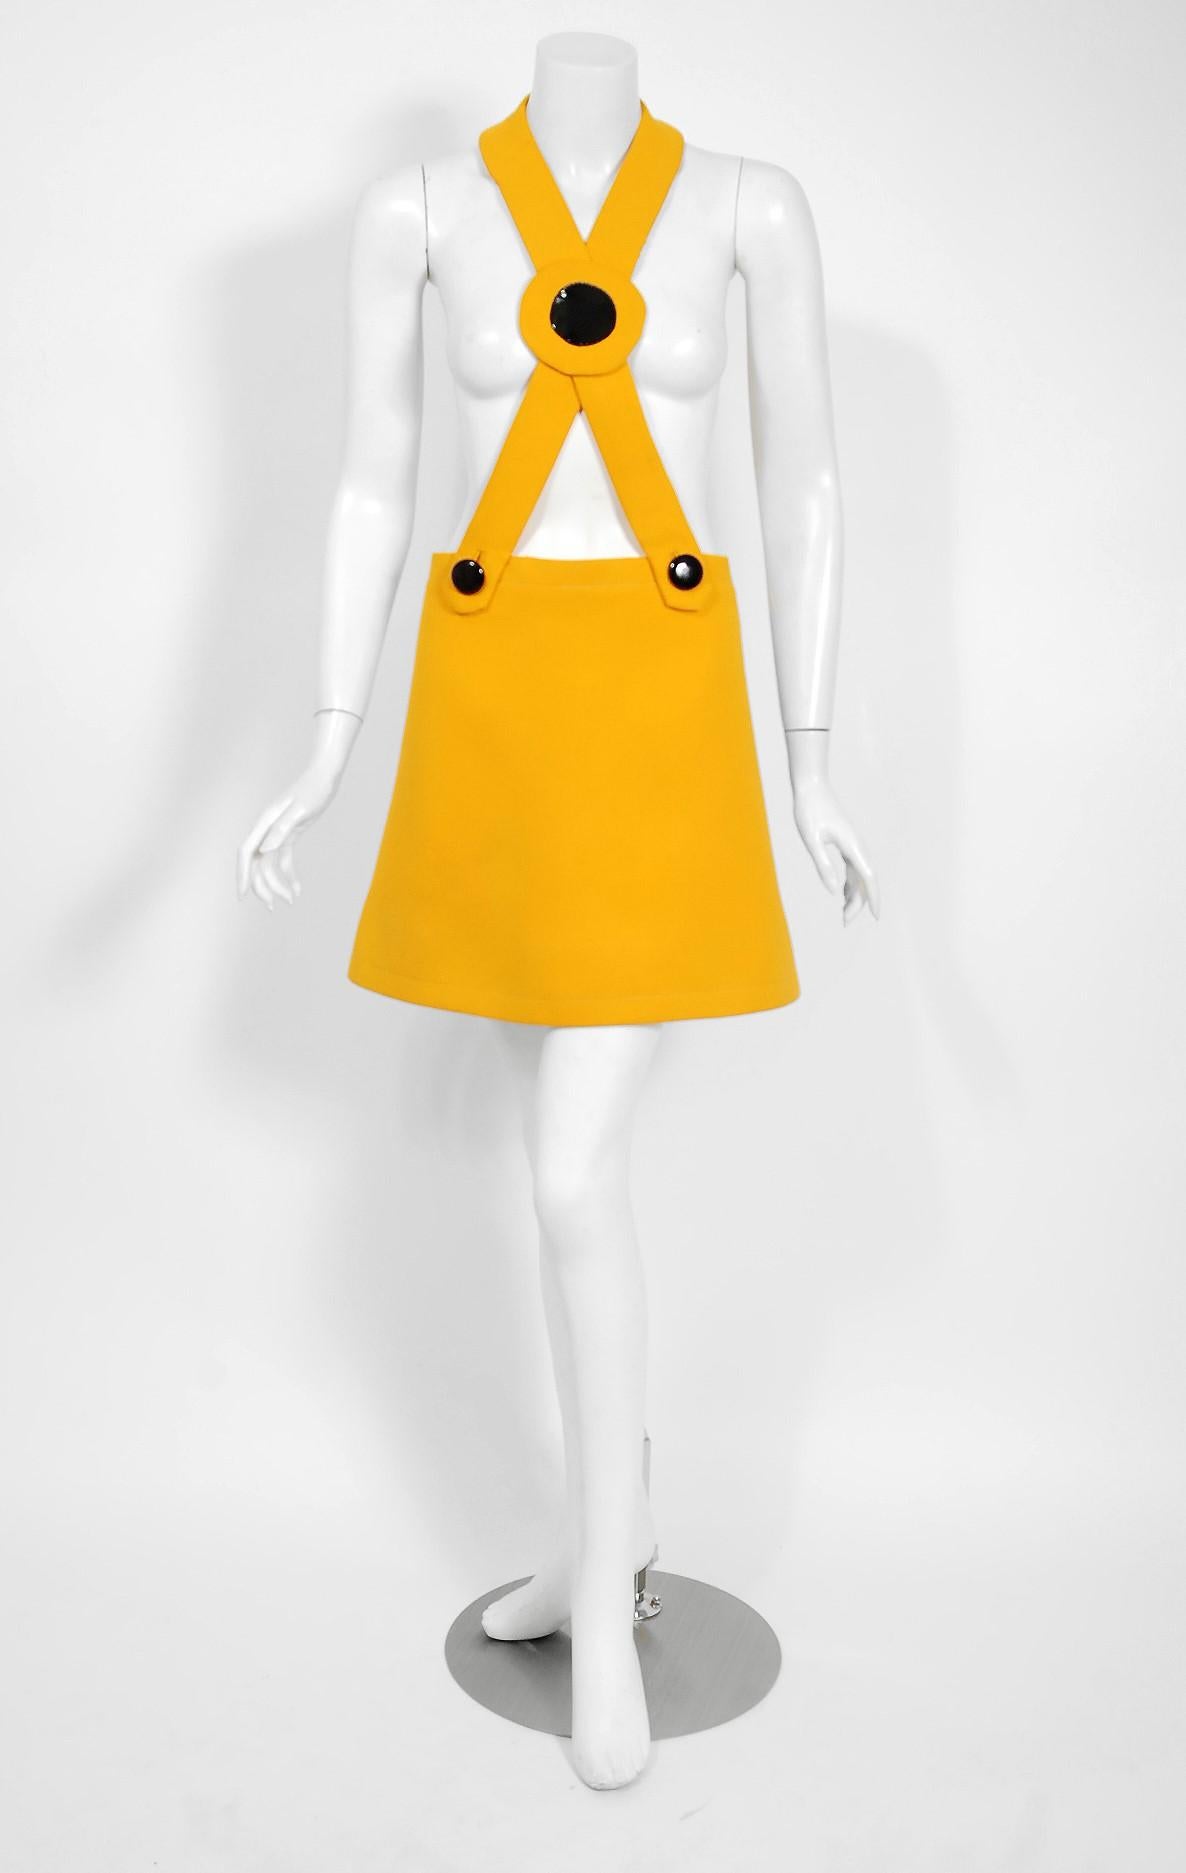 Magnificent Pierre Cardin mod pinafore dress in a vibraint marigold yellow wool from his iconic 1969 documented collection. The same iconic dress is in The Metropolitan Museum of Art's permanent collection. In 1951 Cardin opened his own couture